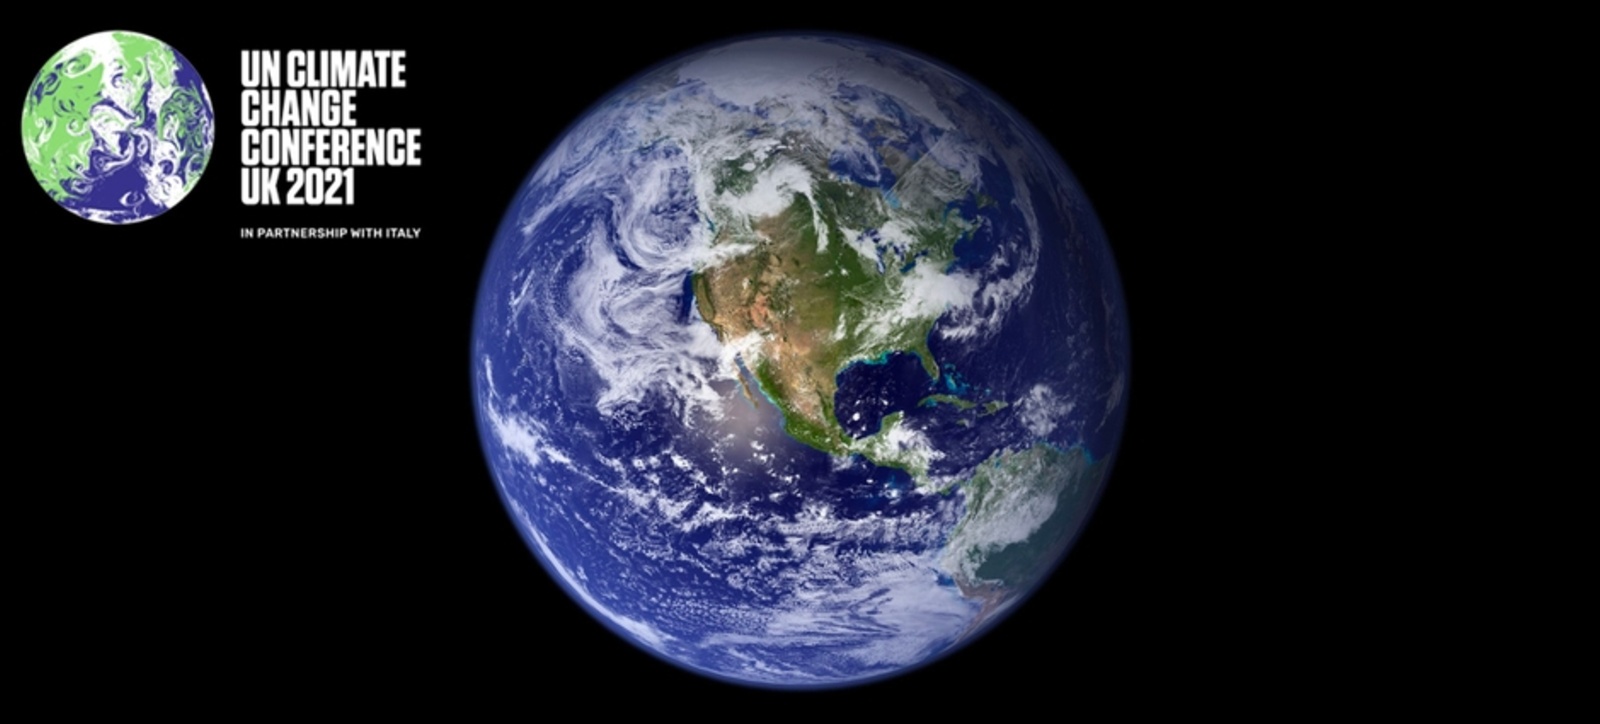 A photograph of the Earth in space and the logo for the UN Climate Change Conference UK 2021